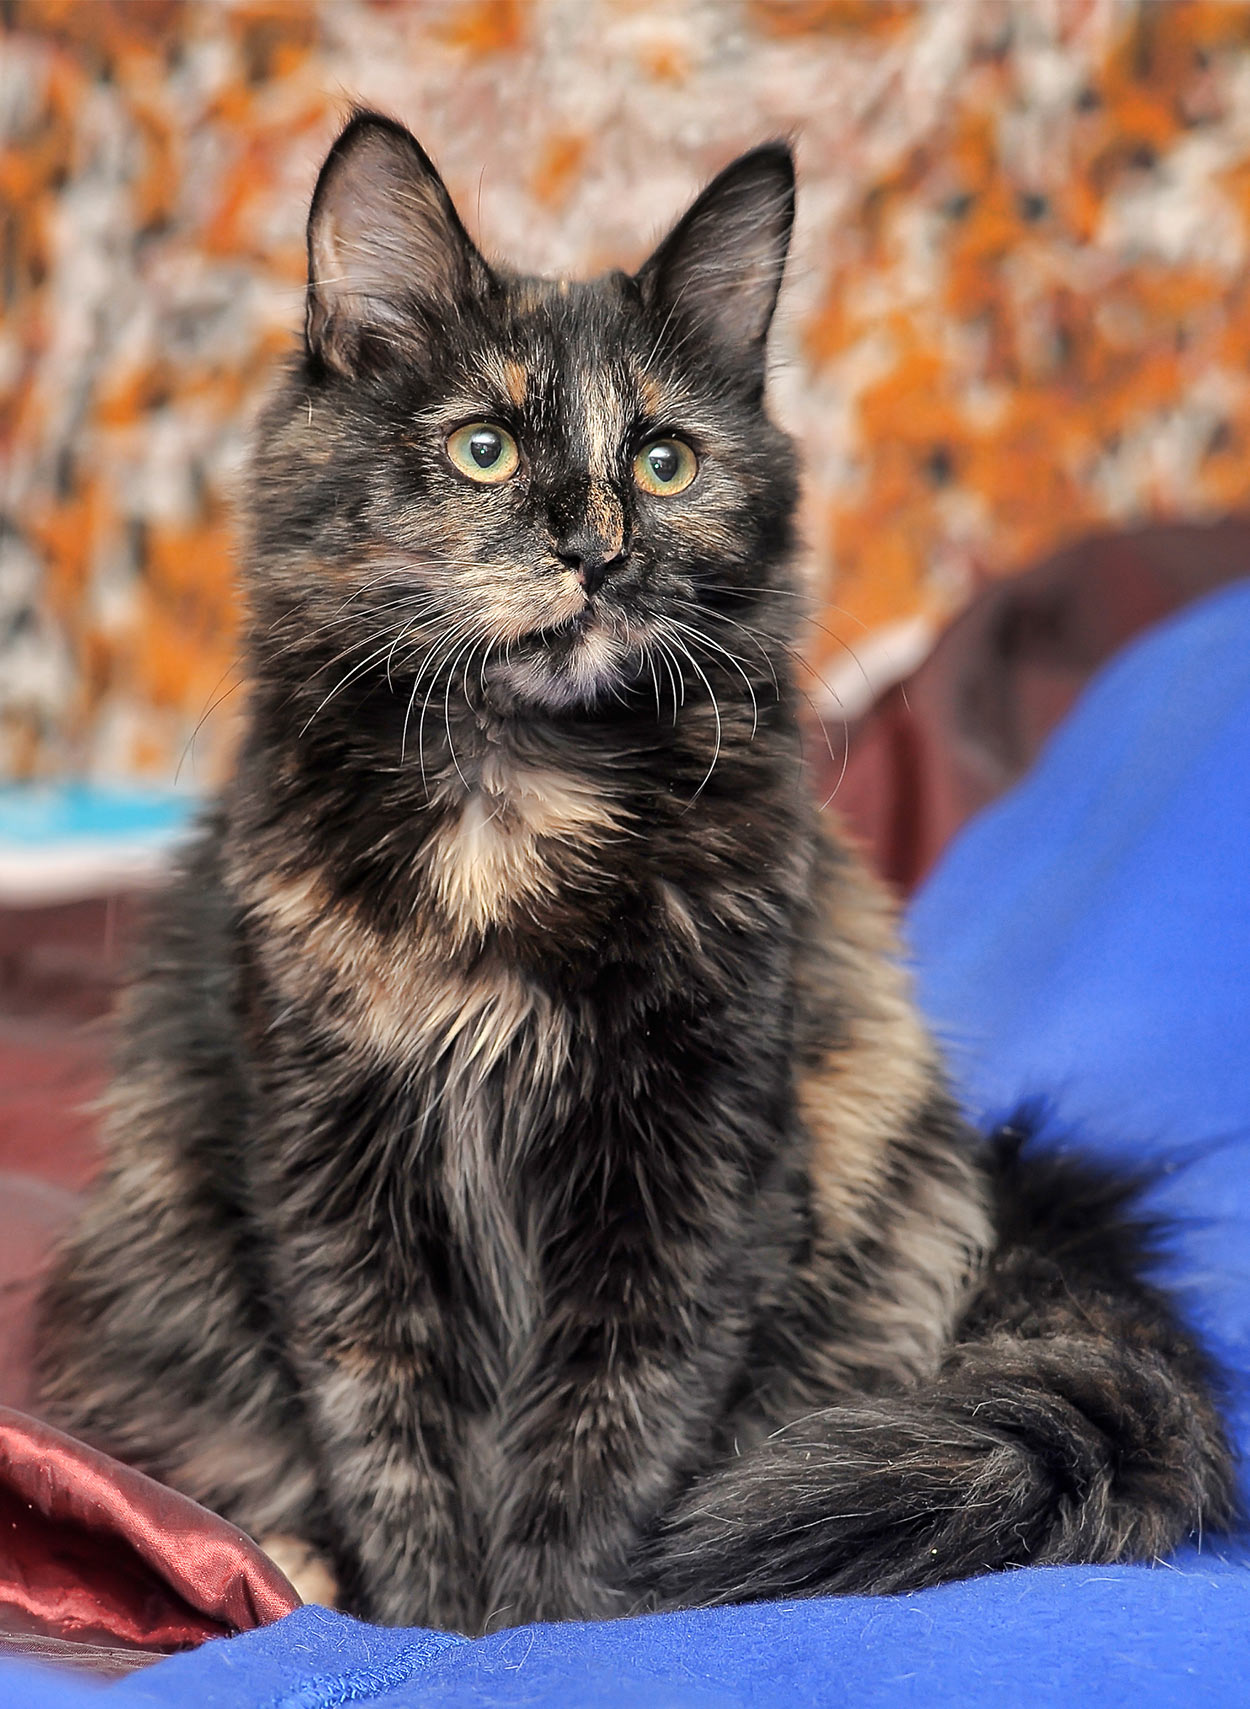 8+ Facts About Tortoiseshell Cats [Personality, History, Health